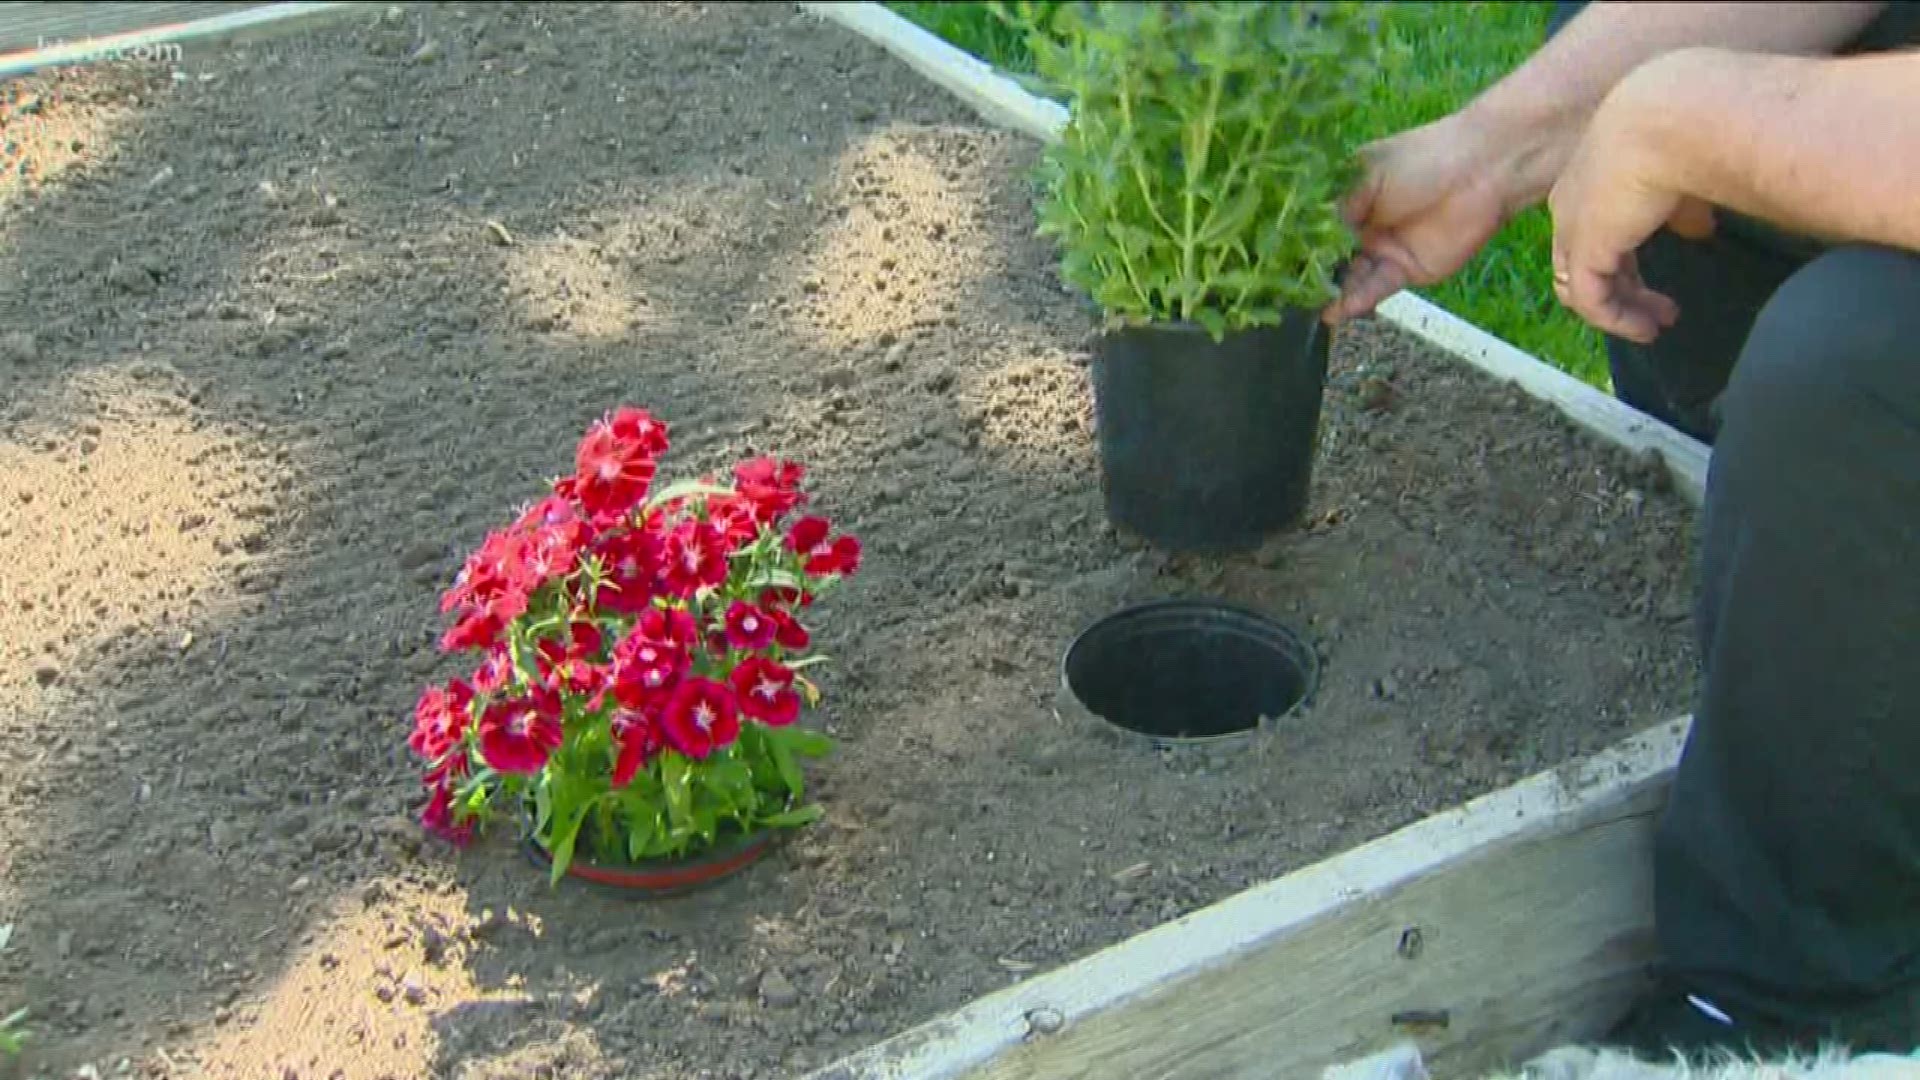 Jim Duthie shares some tips he's gotten from other gardeners that can help you save time and money.